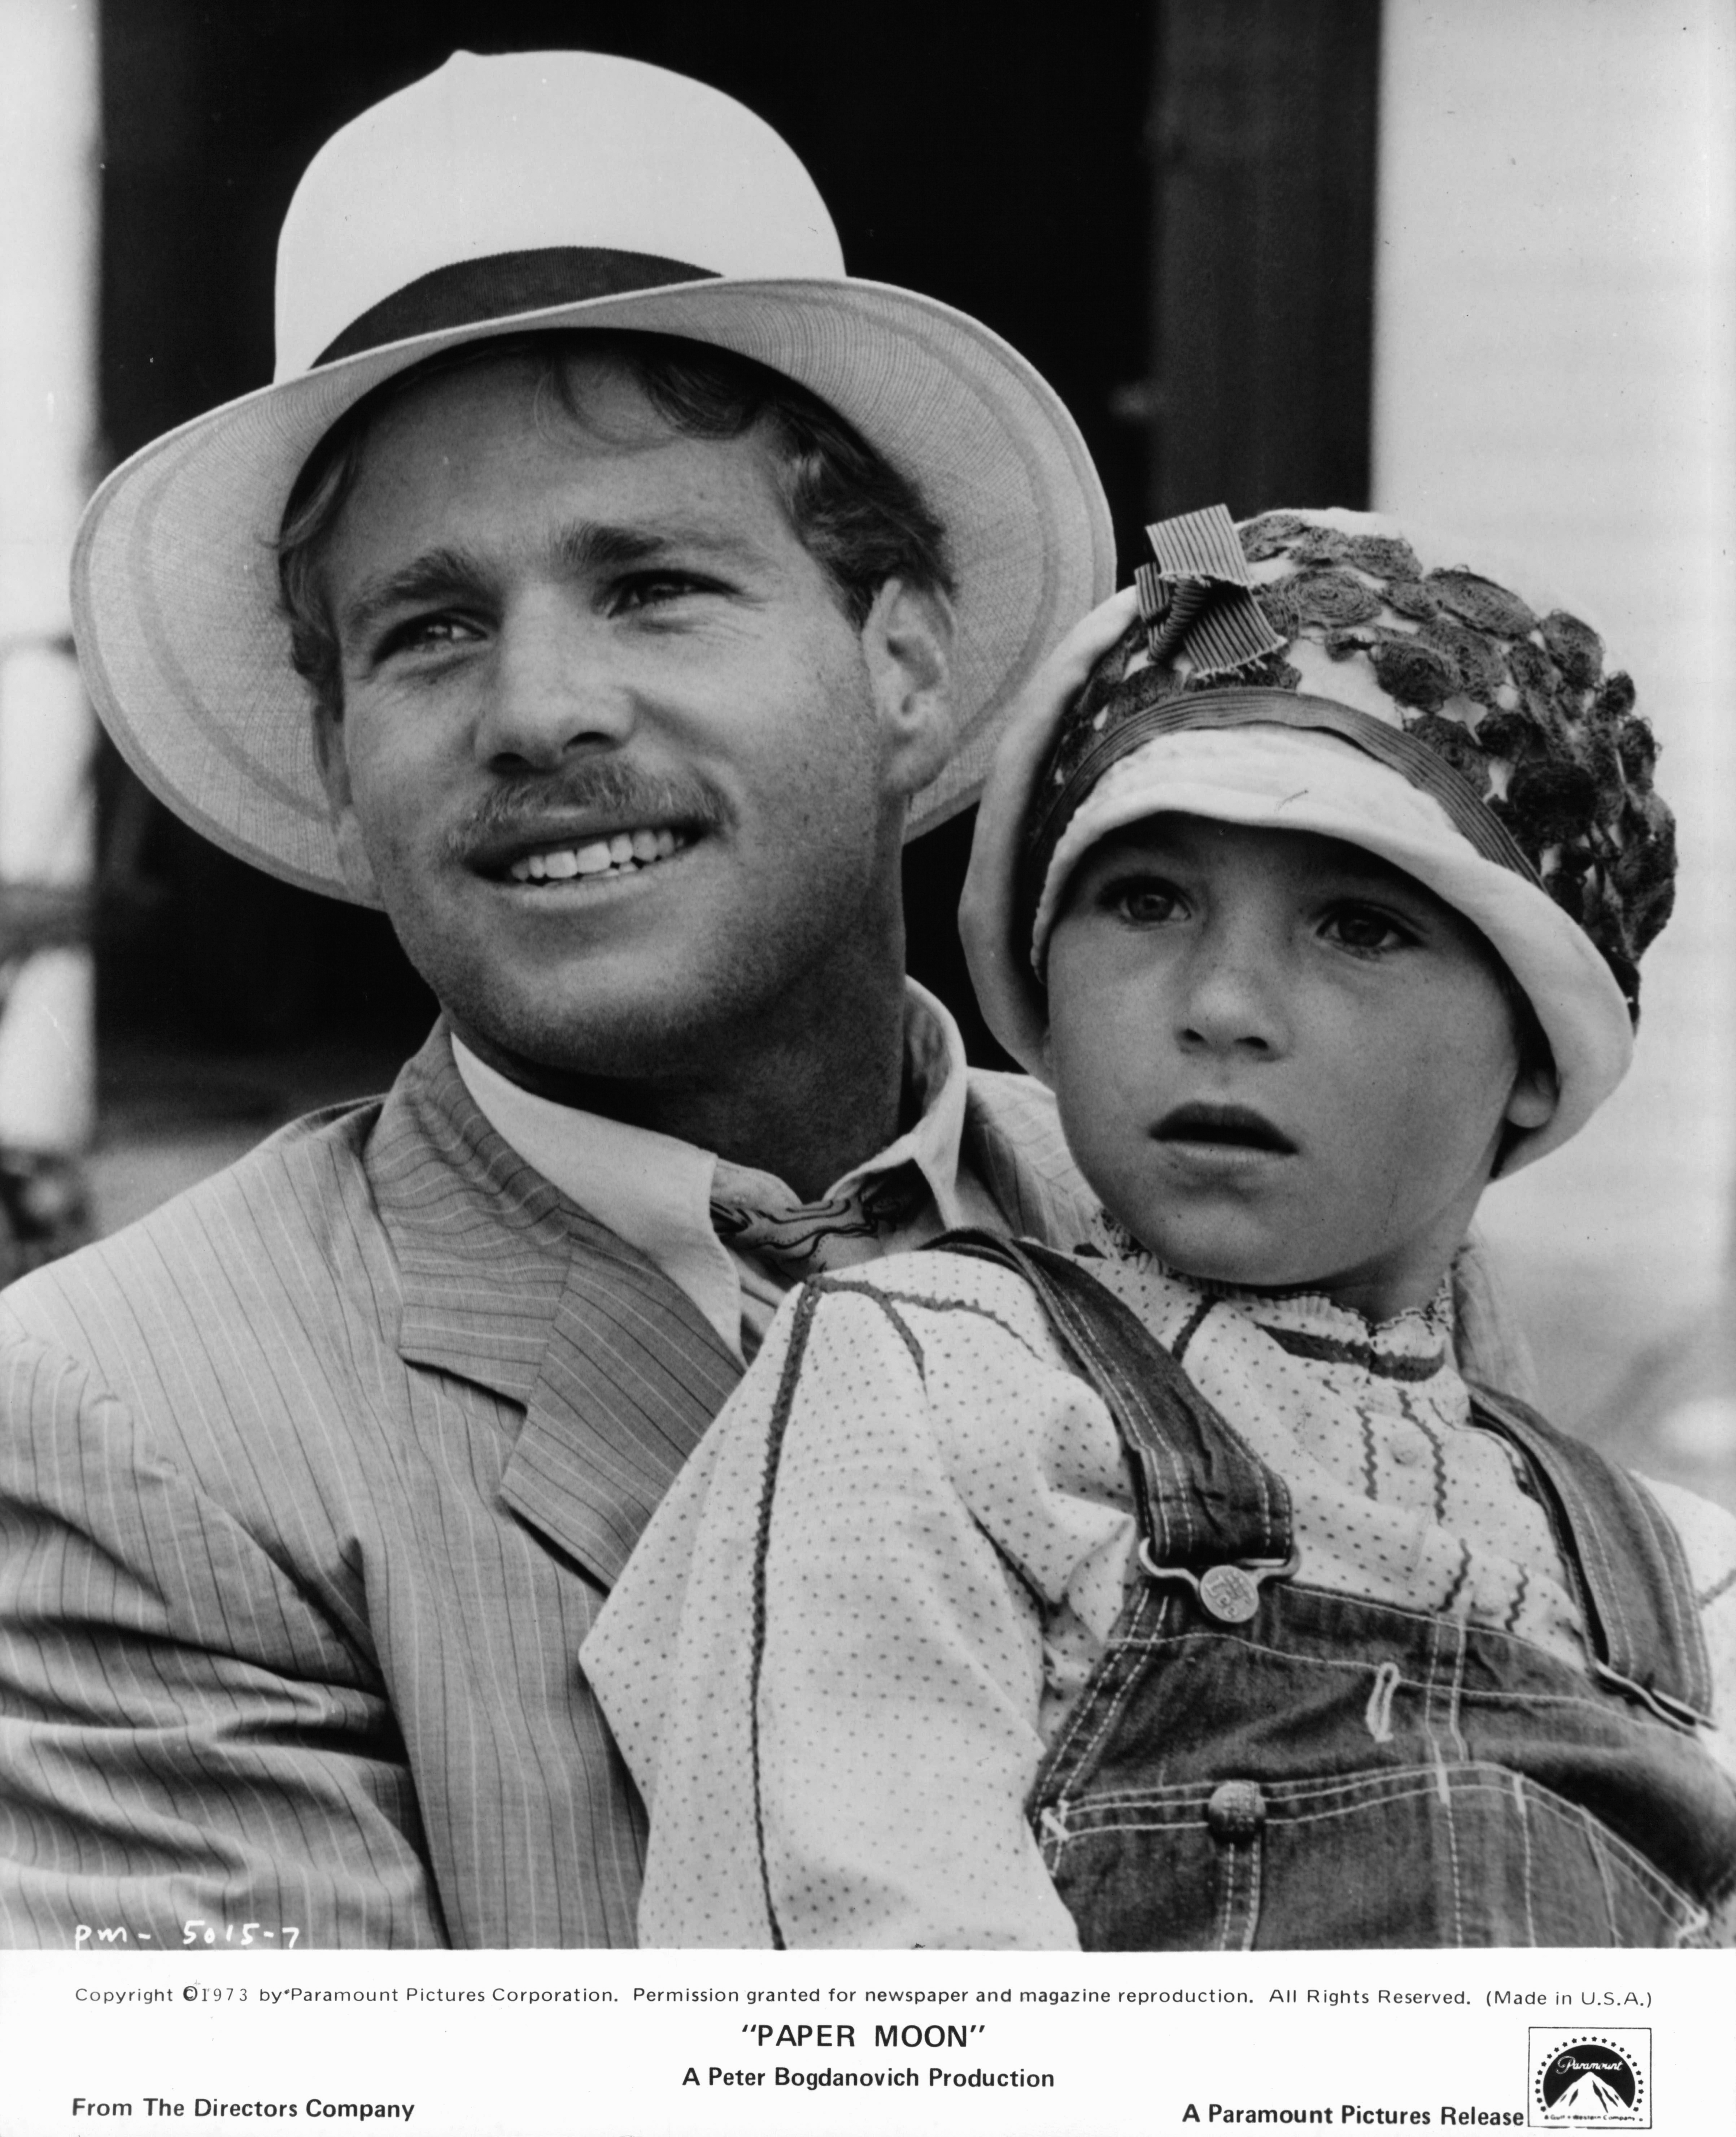 Ryan O'Neal and Tatum O'Neal on the set "Paper Moon" 1973 | Source: Getty Images